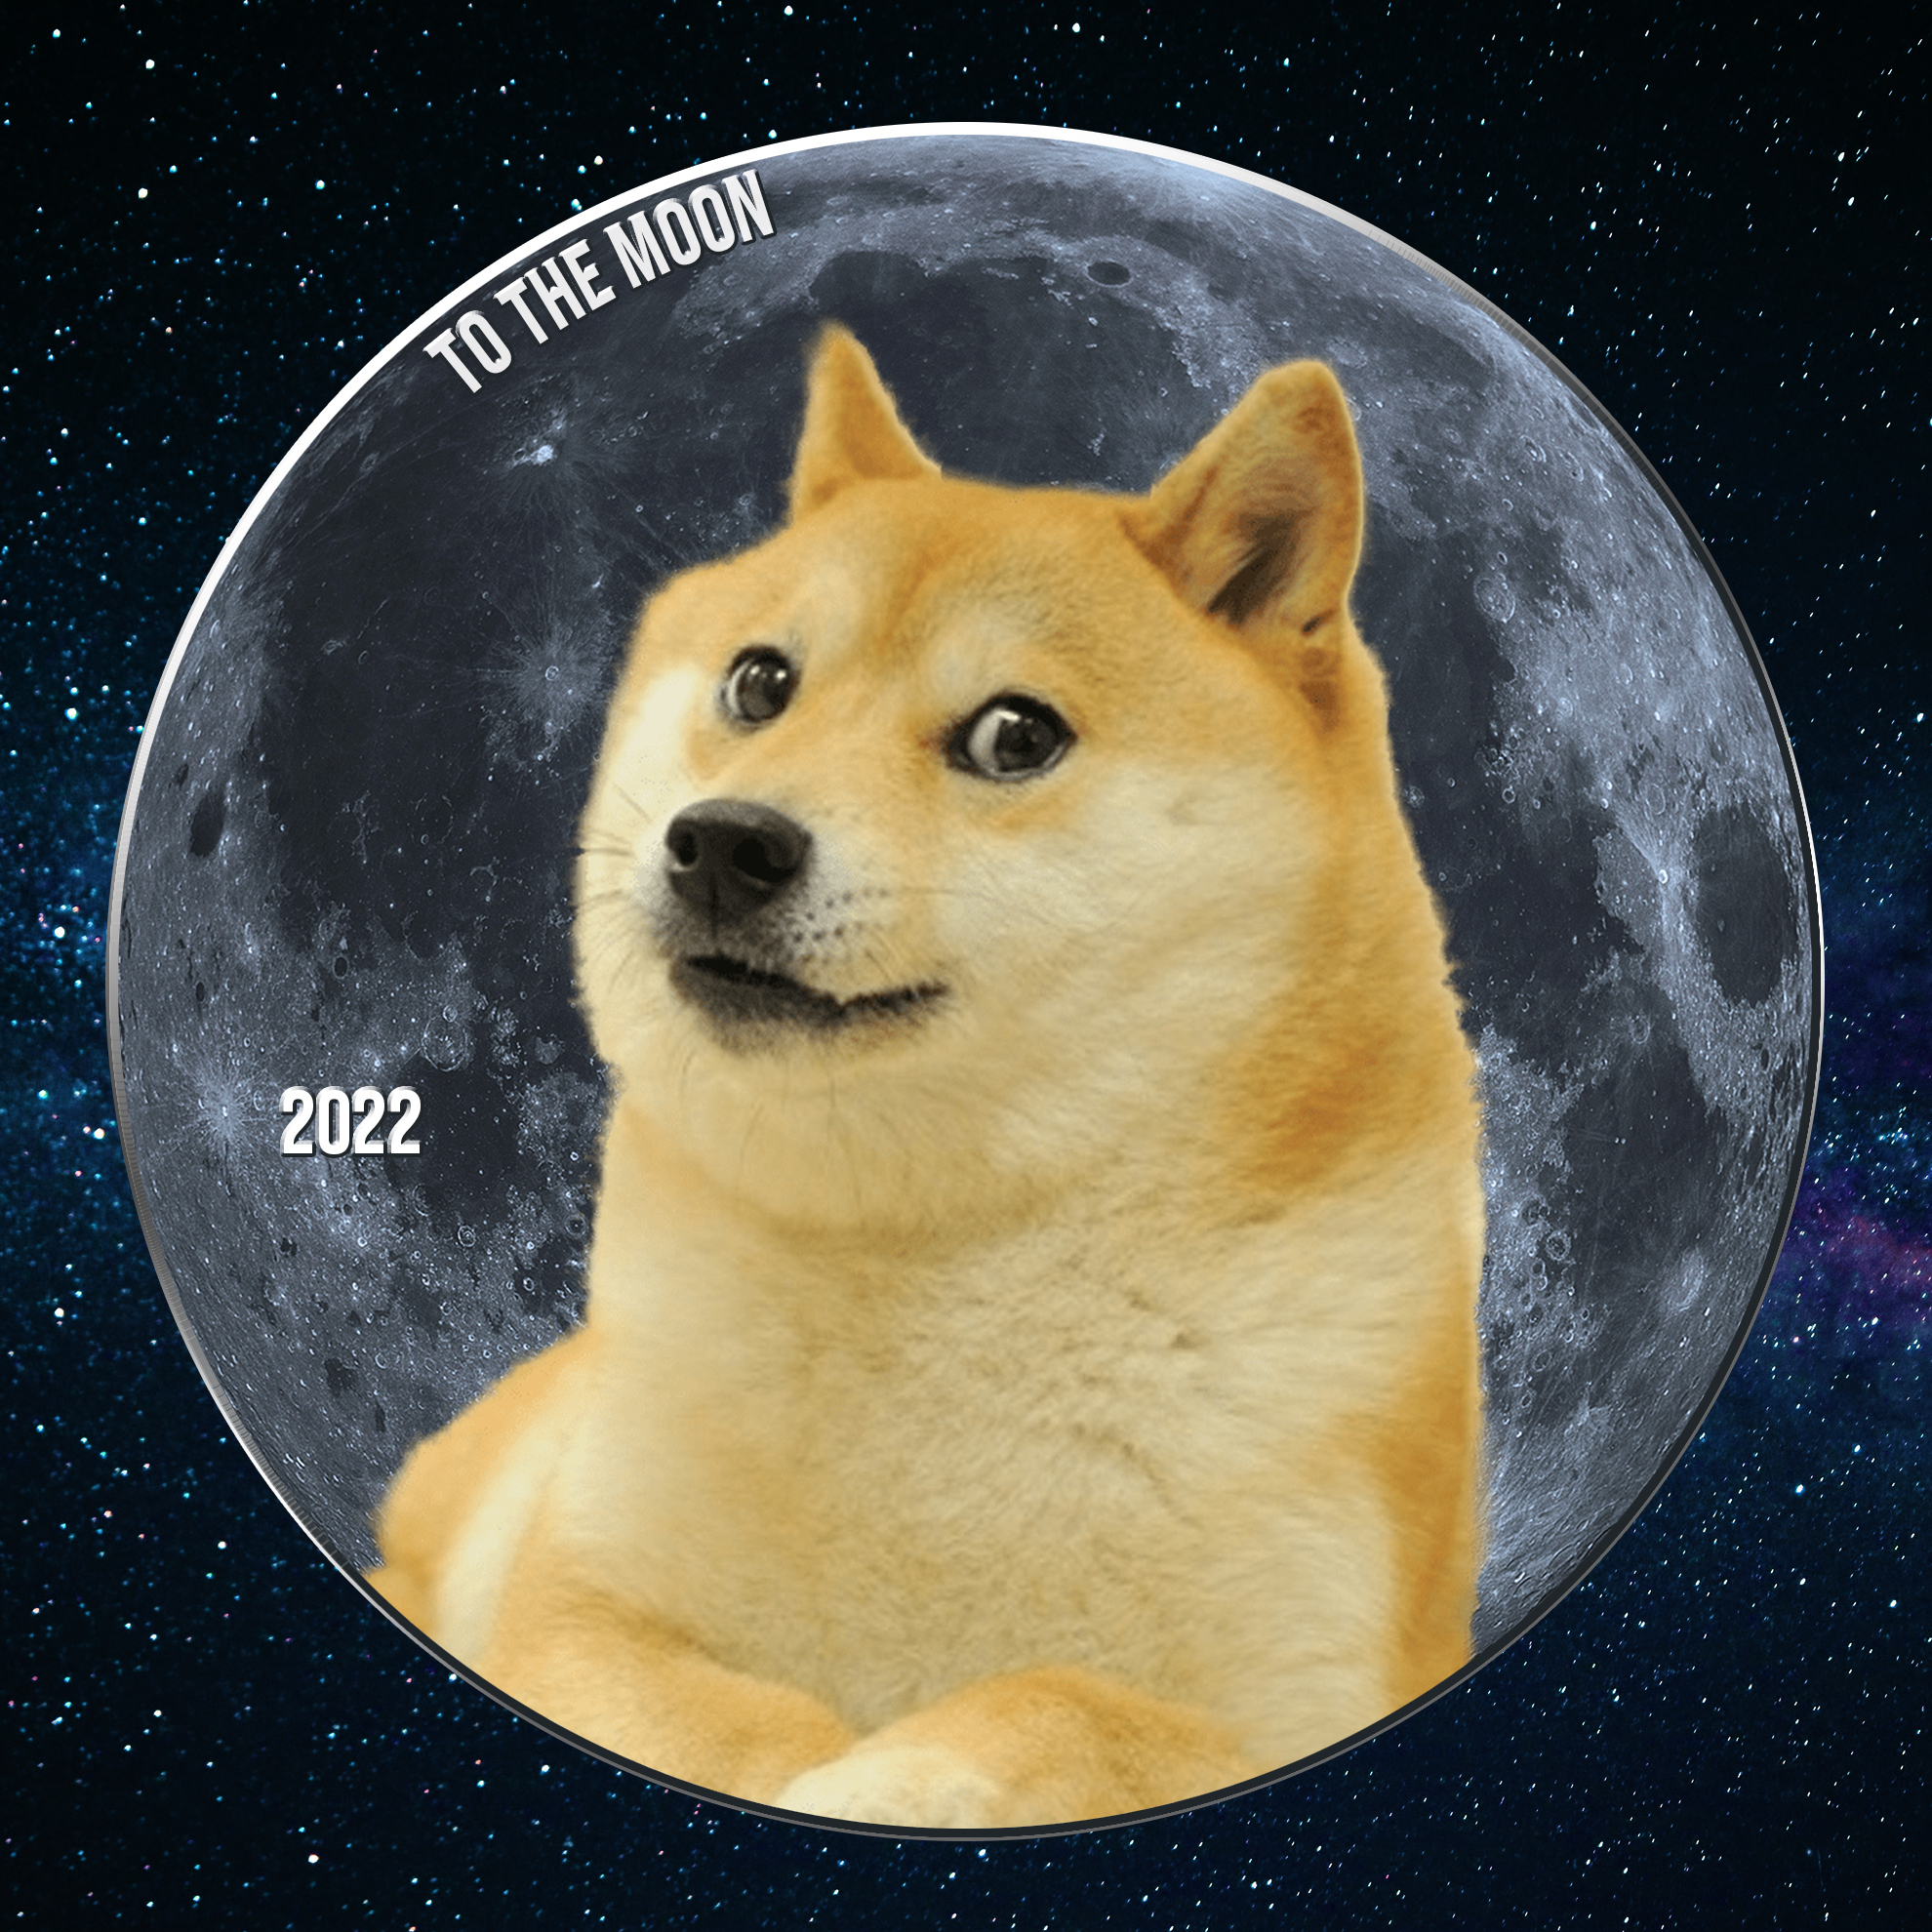 SpaceX Receives Payment in Dogecoin for Rescheduled DOGE-1 Space Mission